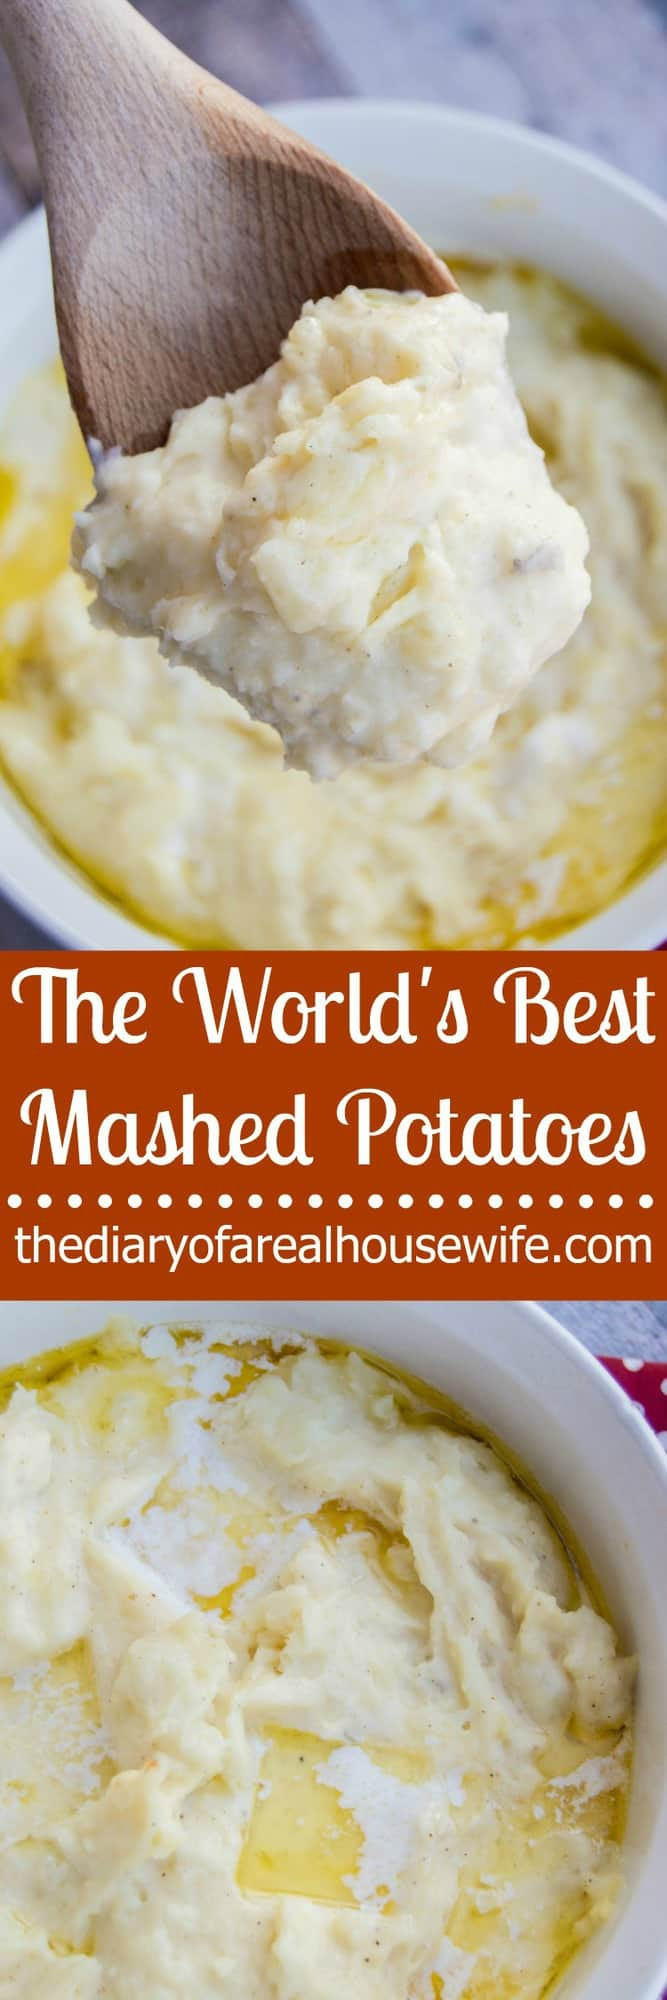 The Best Mashed Potatoes
 World s Best Mashed Potatoes The Diary of a Real Housewife